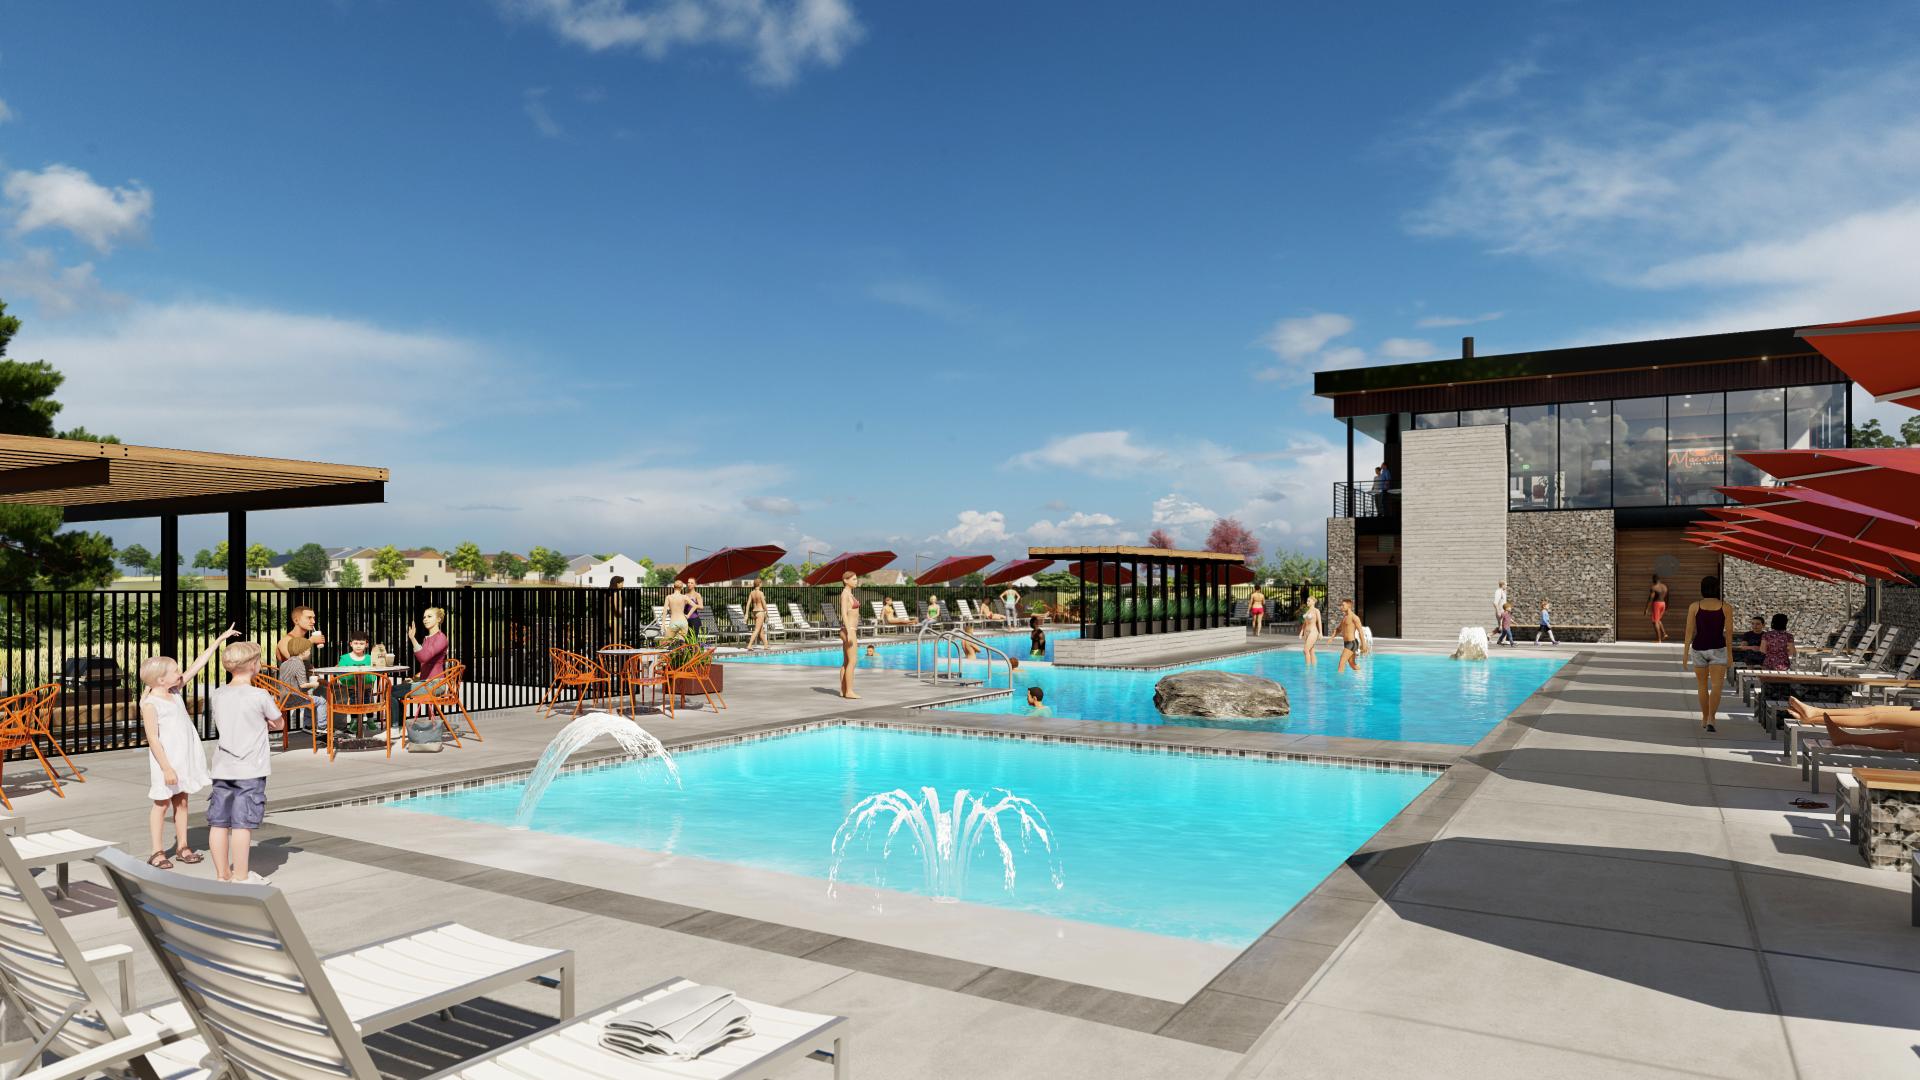 The Spoke Amenity Center pool and water play area